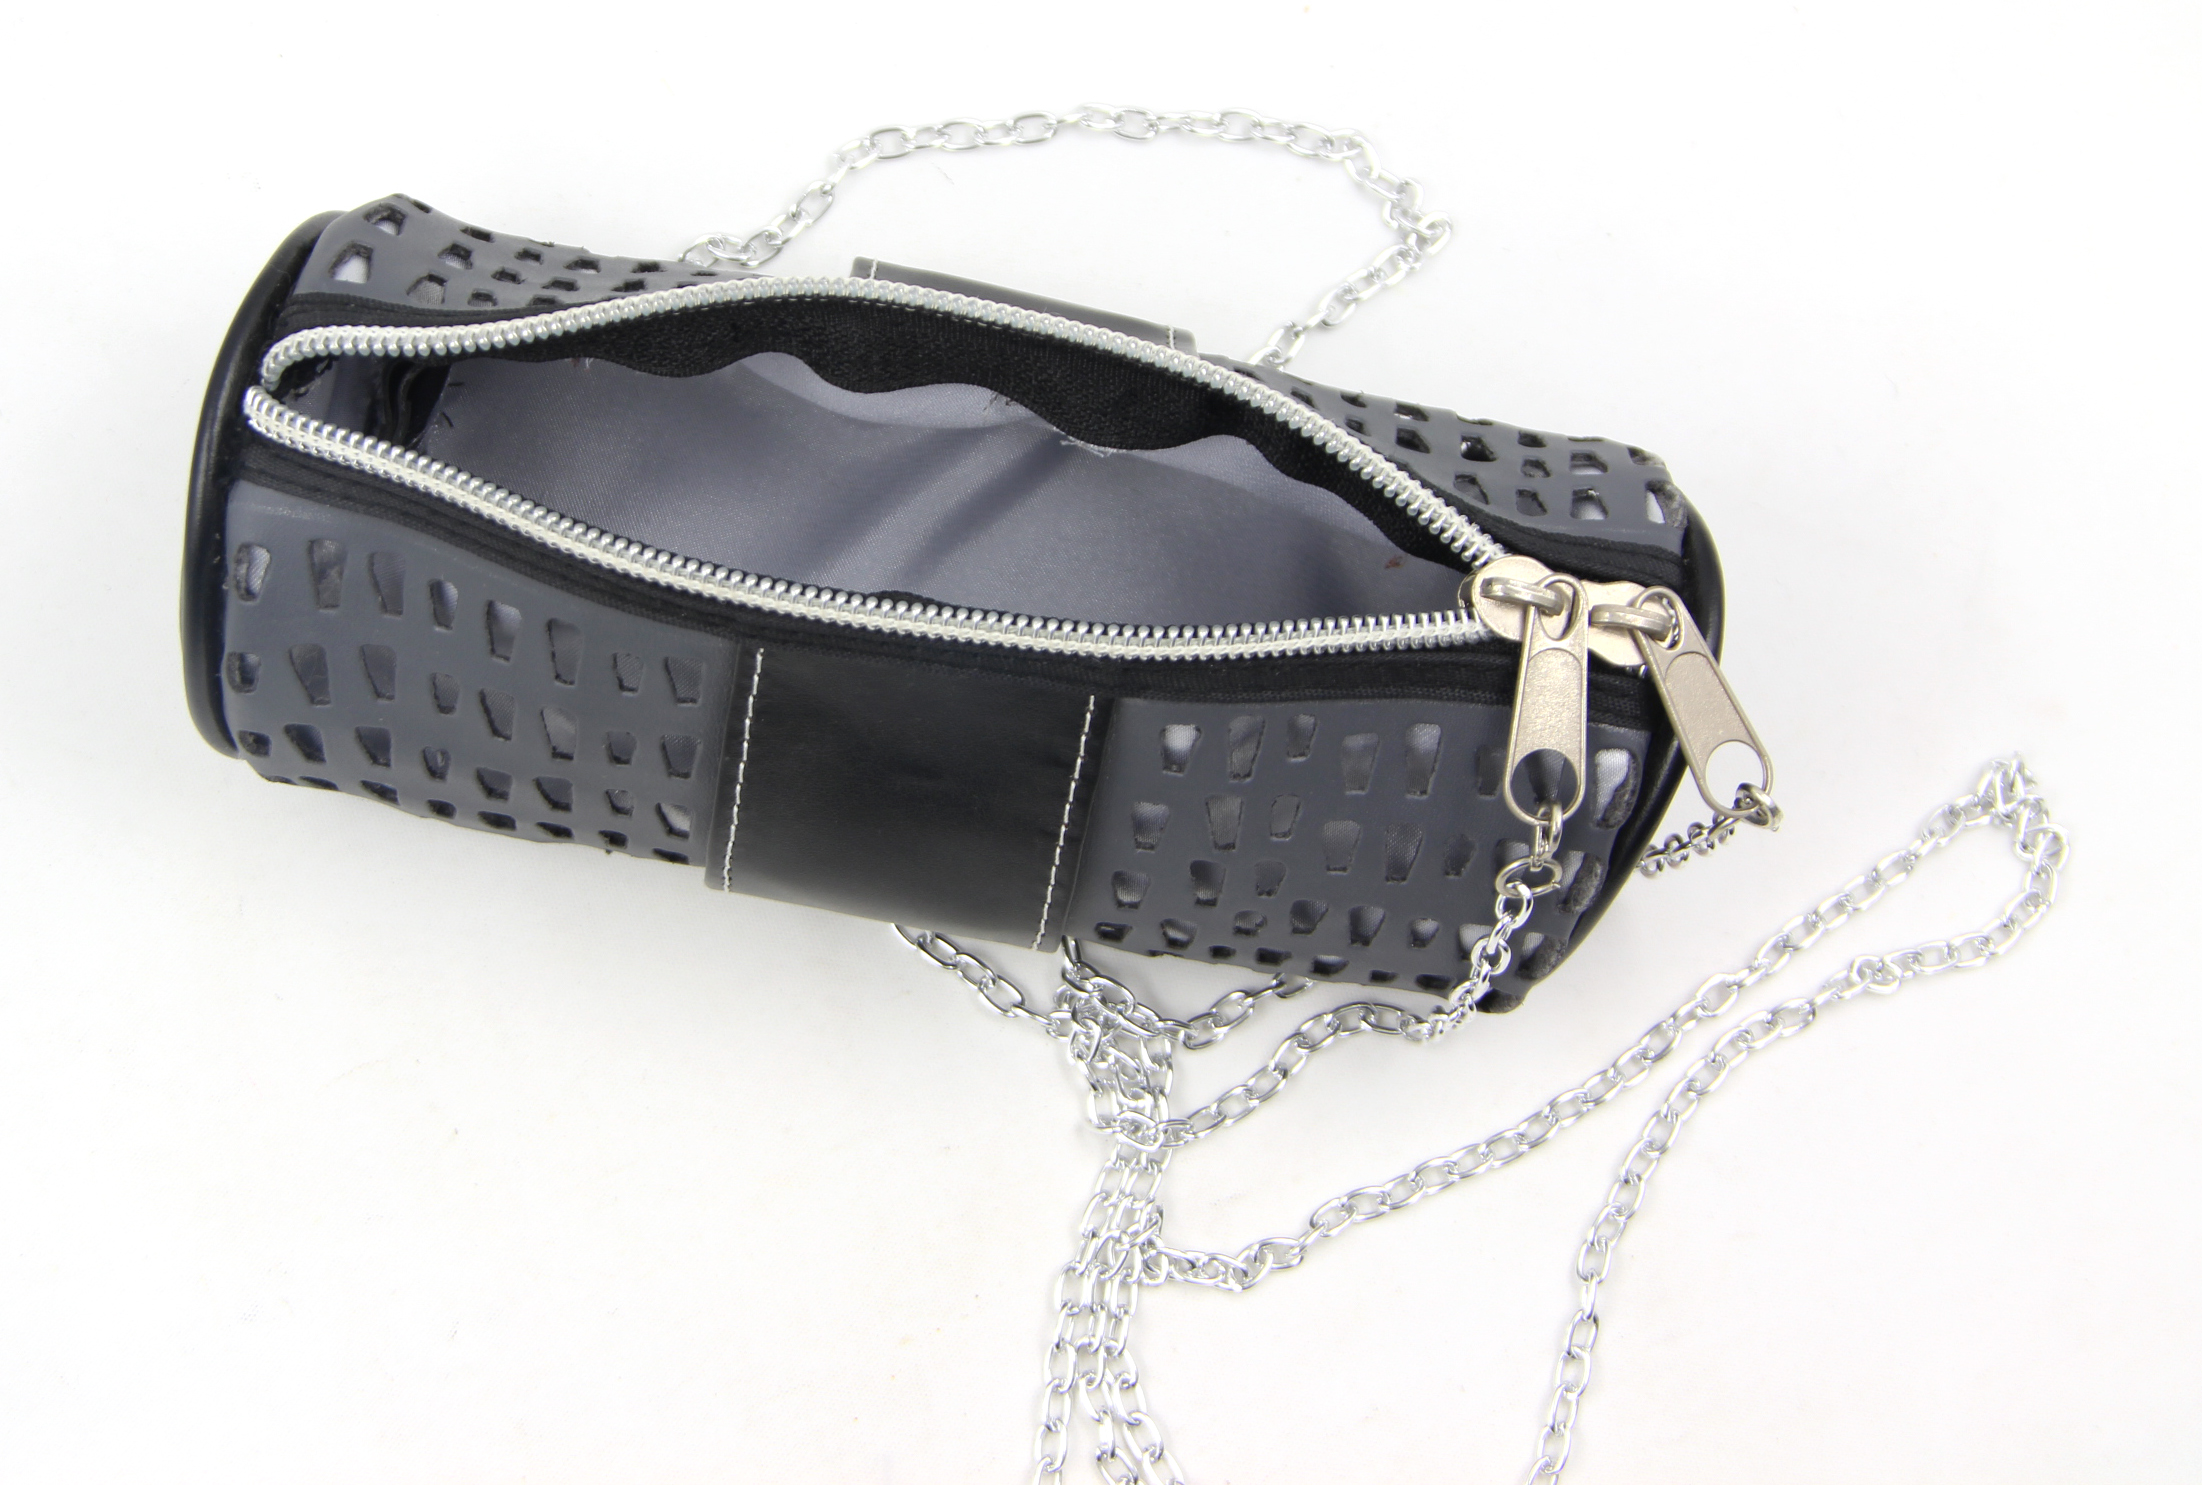 New product fashion lady bag with accessories long metal chain